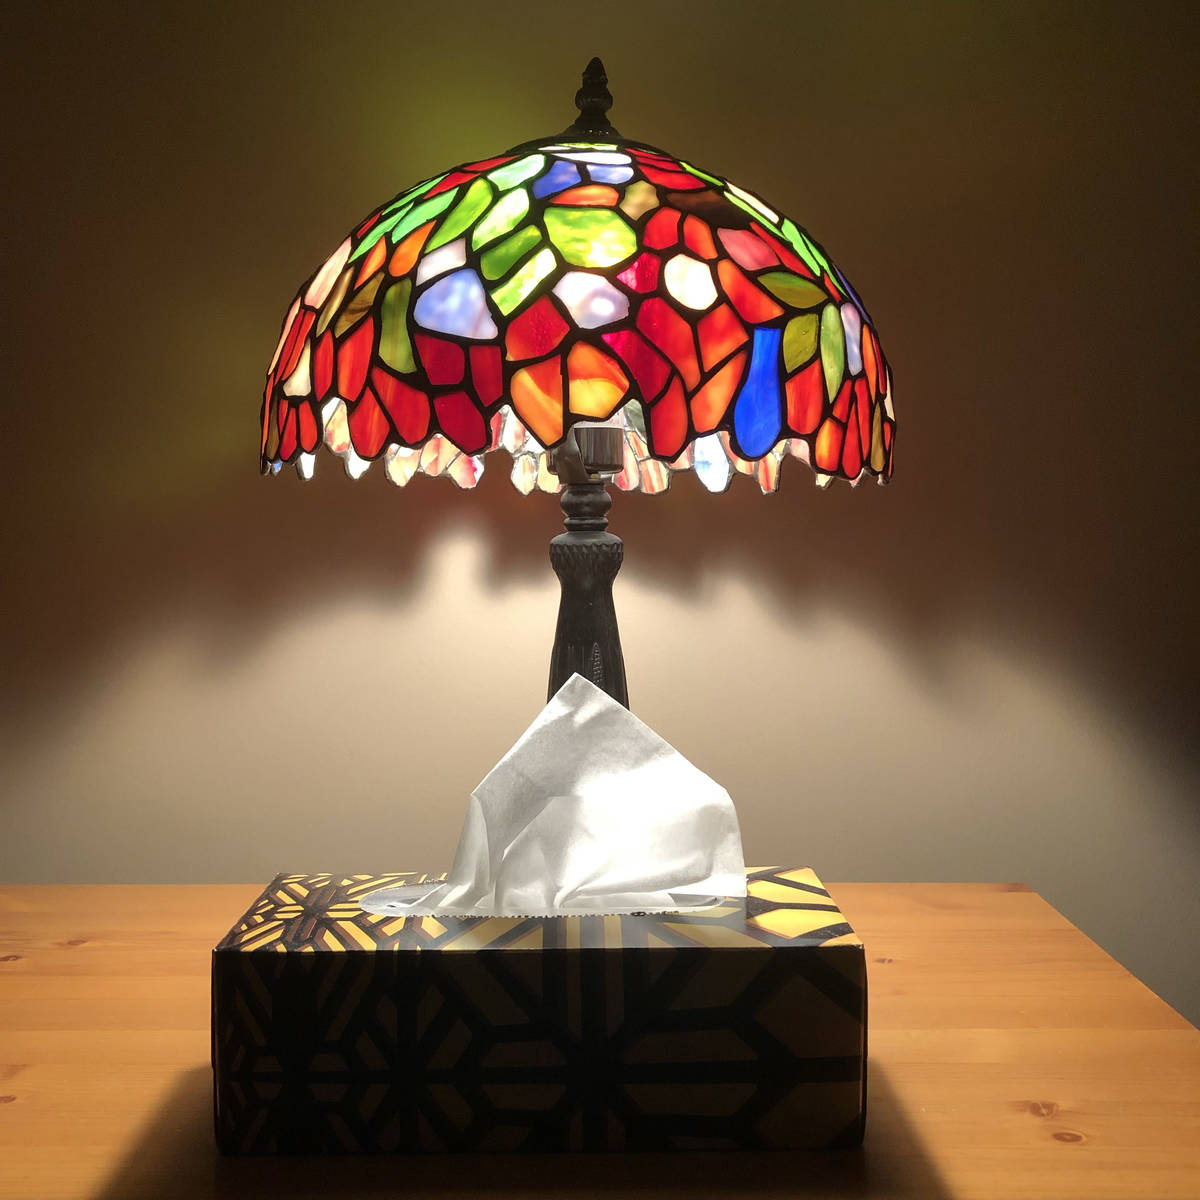 Stained-glass lamps became popular in 1895 when the first Tiffany lamp was created. (Getty Images)